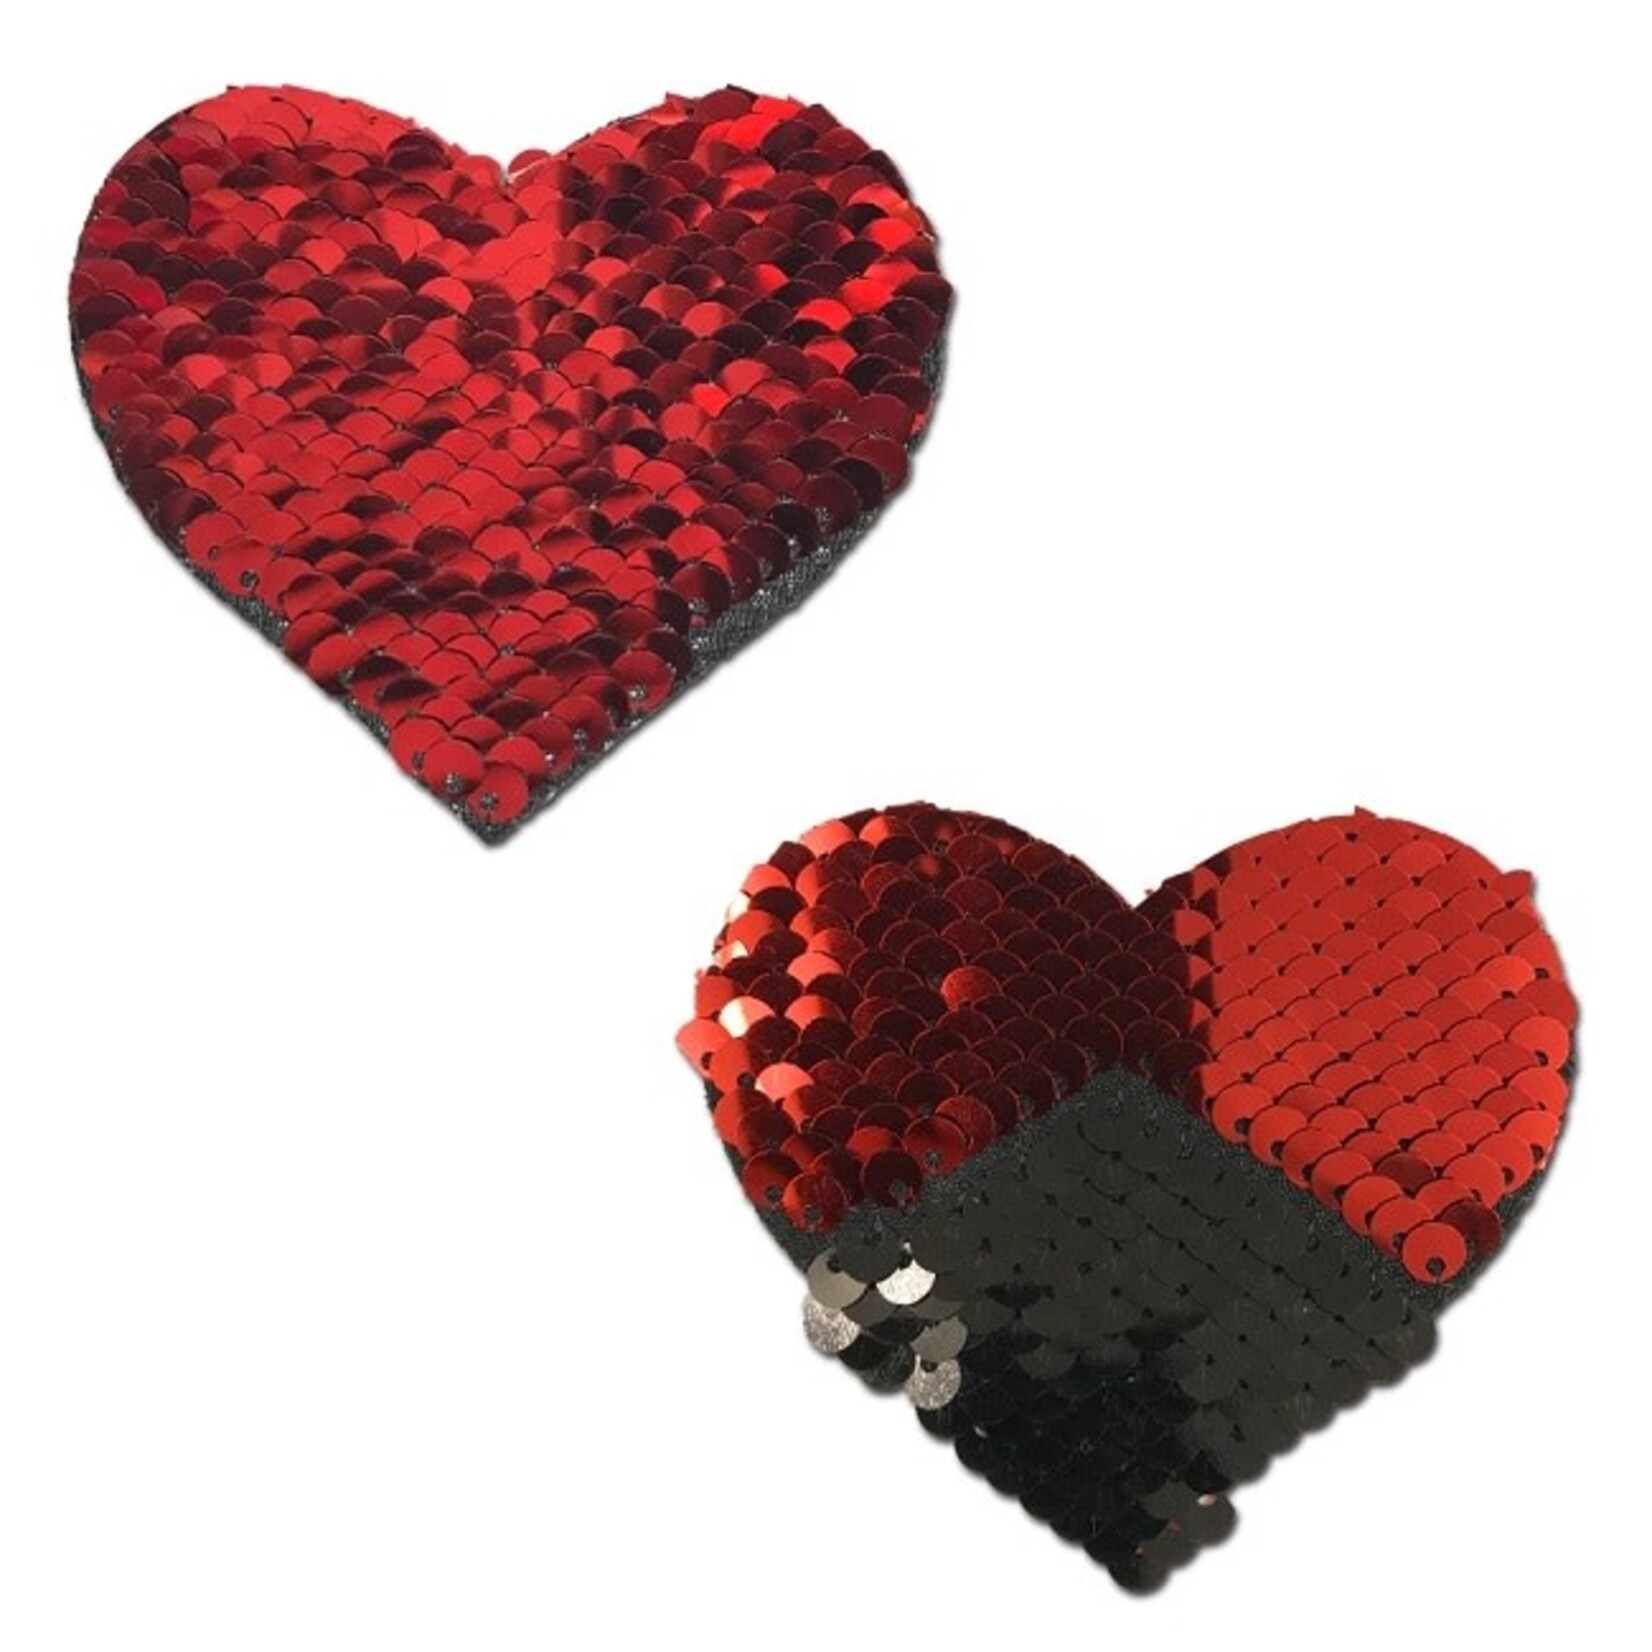 Pastease Pastease Red & Black Color Changing Sequin Heart Nipple Pasties